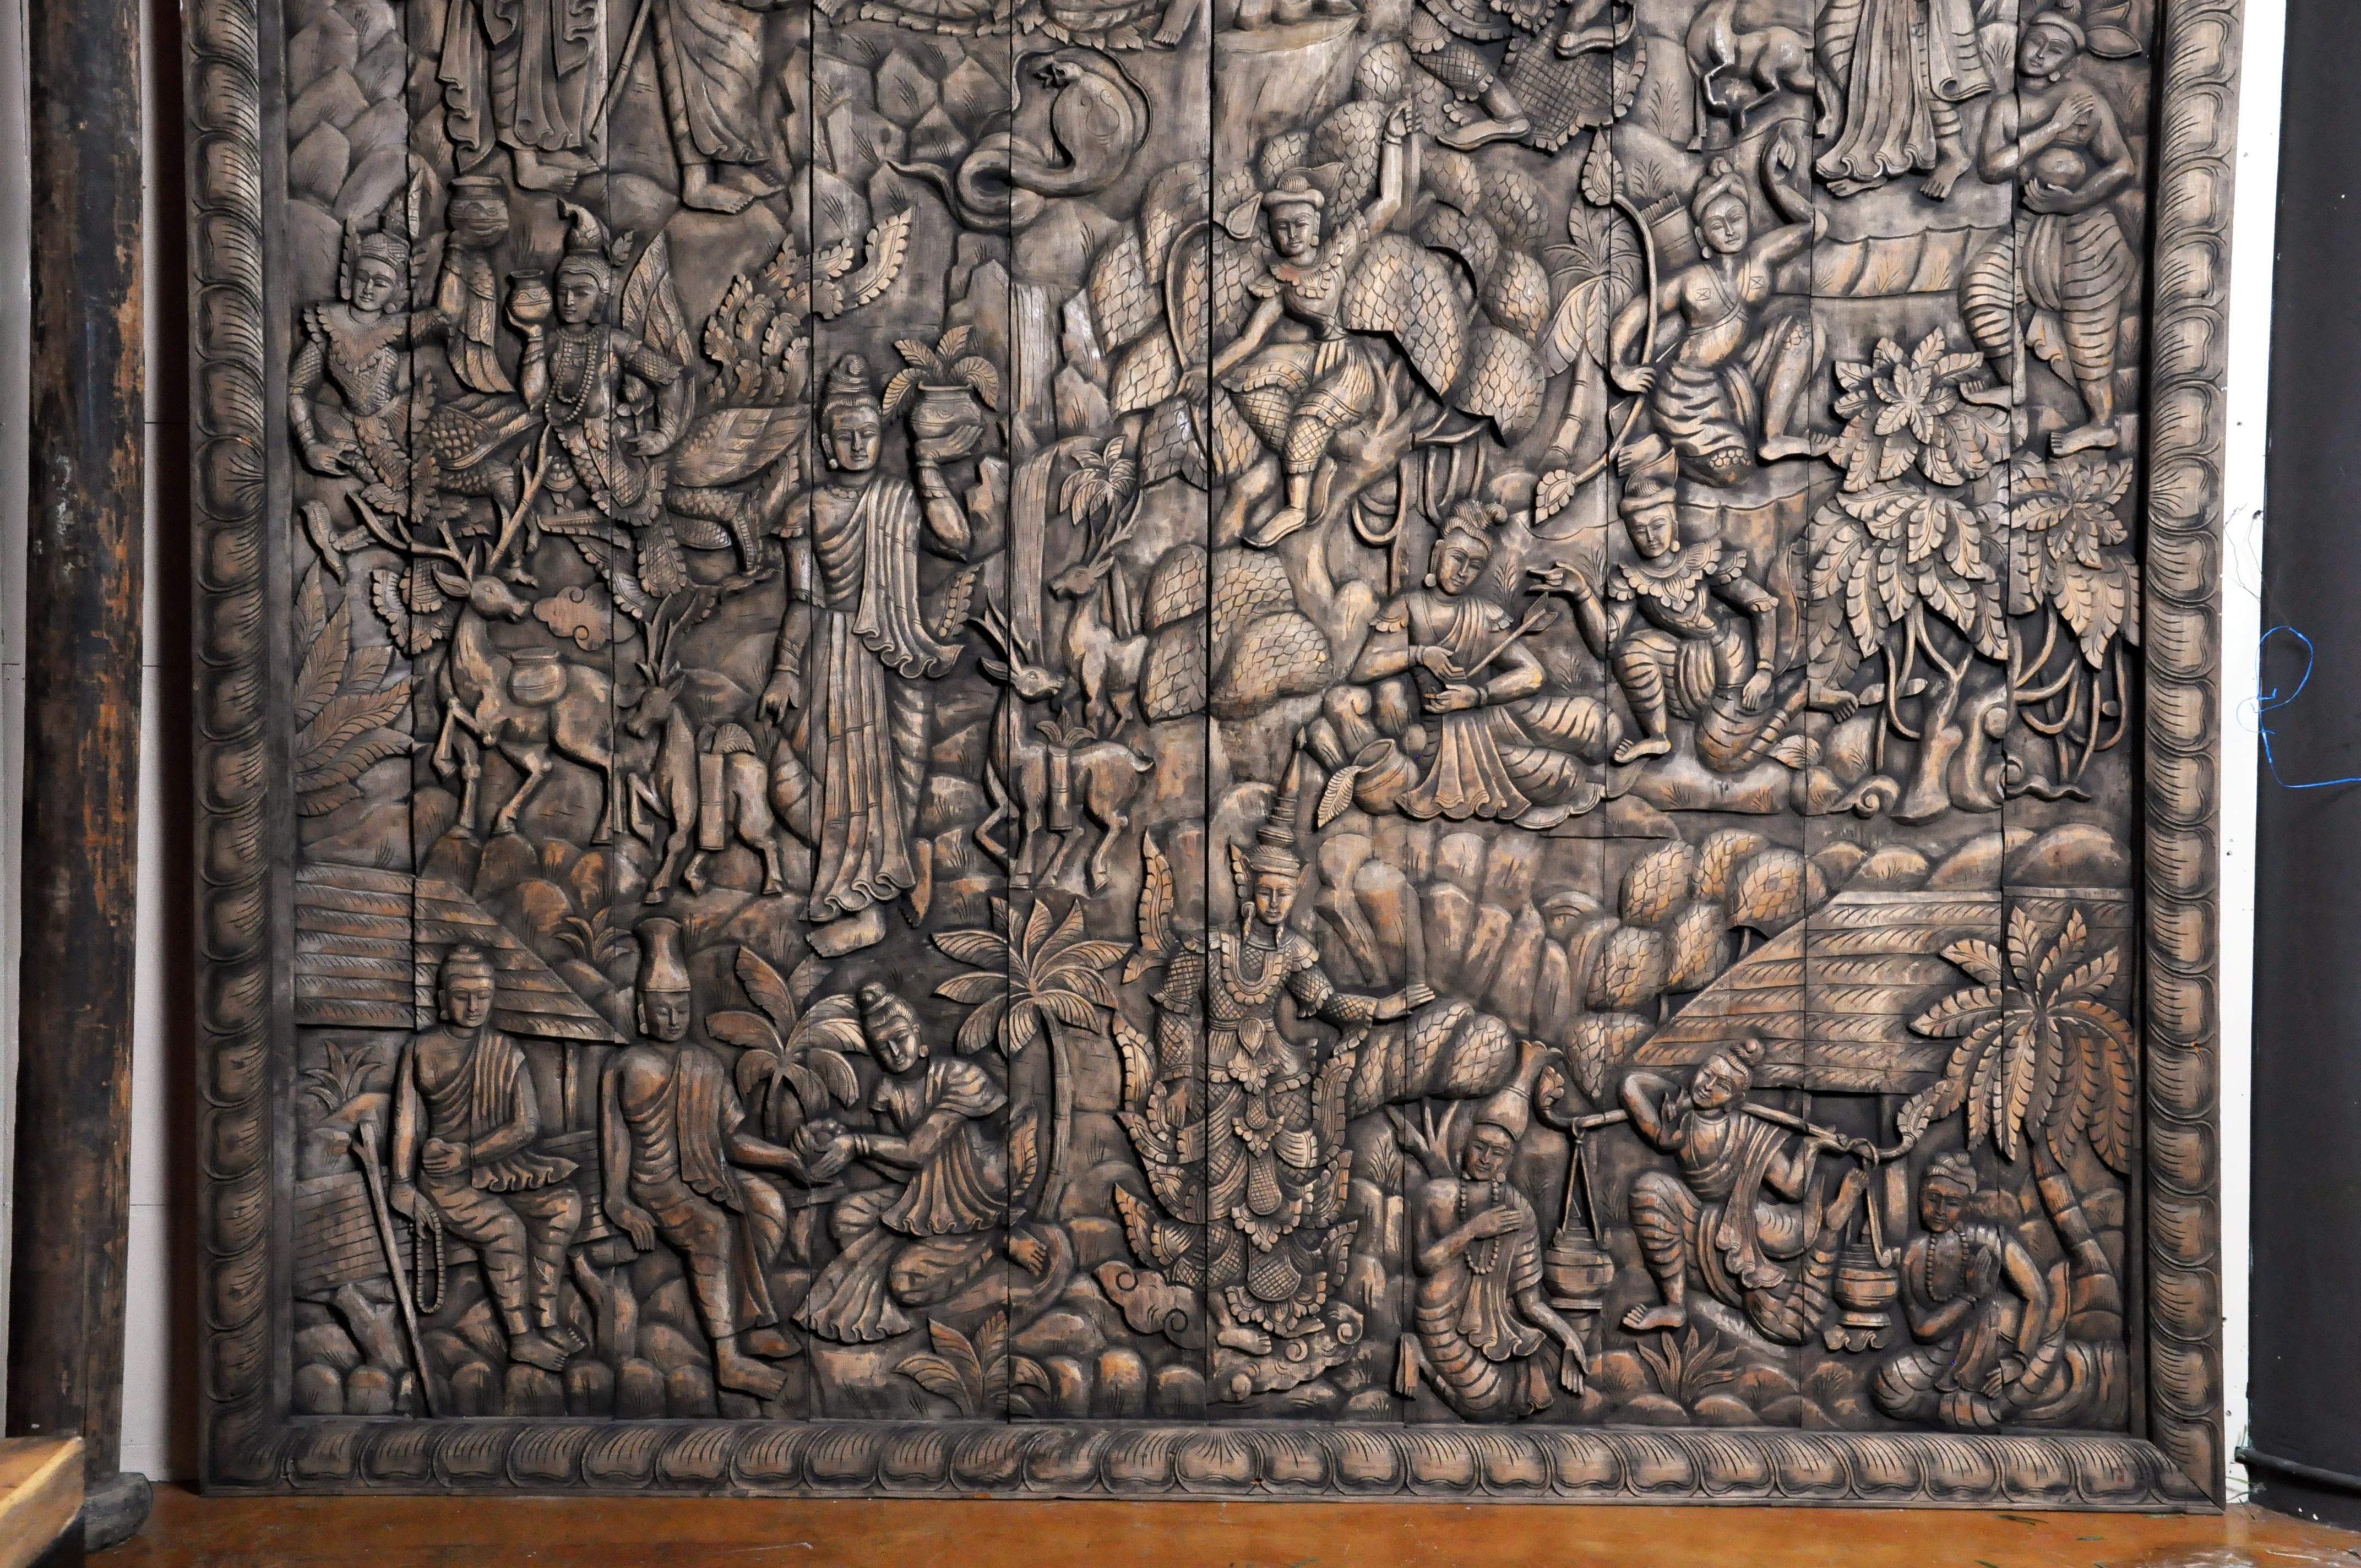 This newly hand carved wall panel features a relief design representing the life and story of Buddha. It includes the Thai angles (also known as deva, thep, thewa or thewada), titans and other mythical figures (Asuras, Pretas, Narakas), a stag